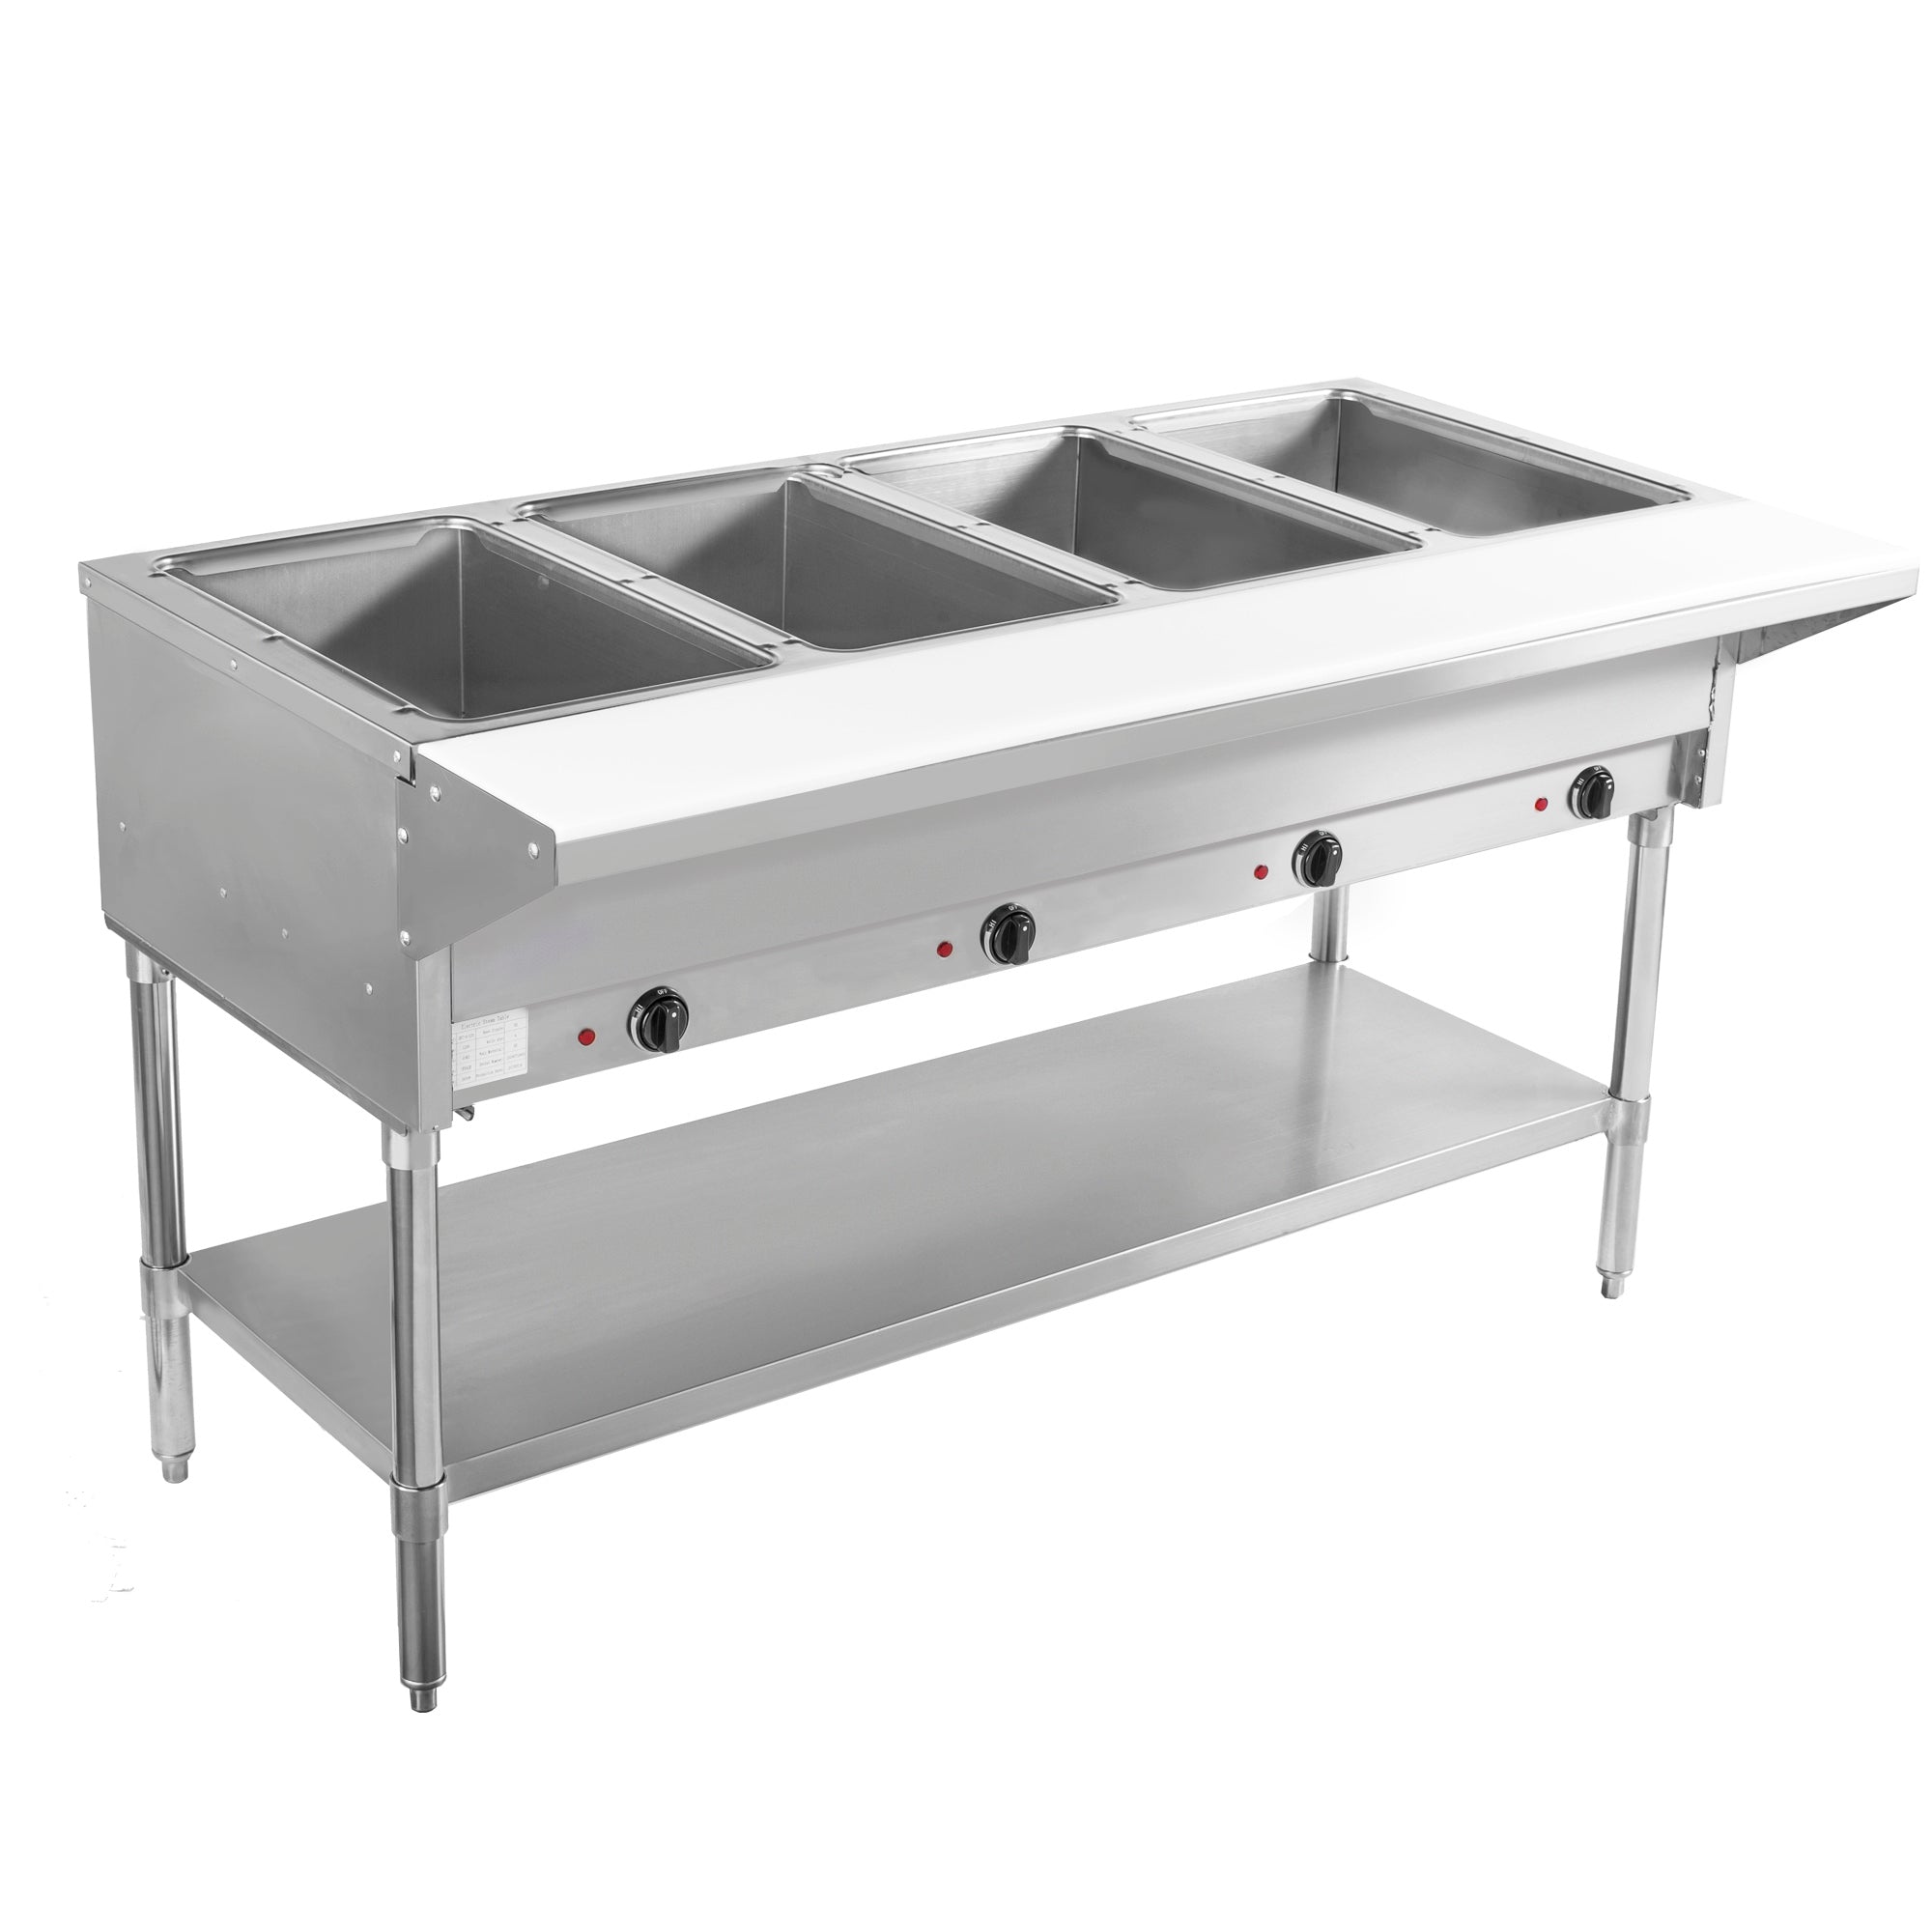 BevLes - BVST-4-120, BevLes 4 Well Electric Steam Table, 120V, in Silver